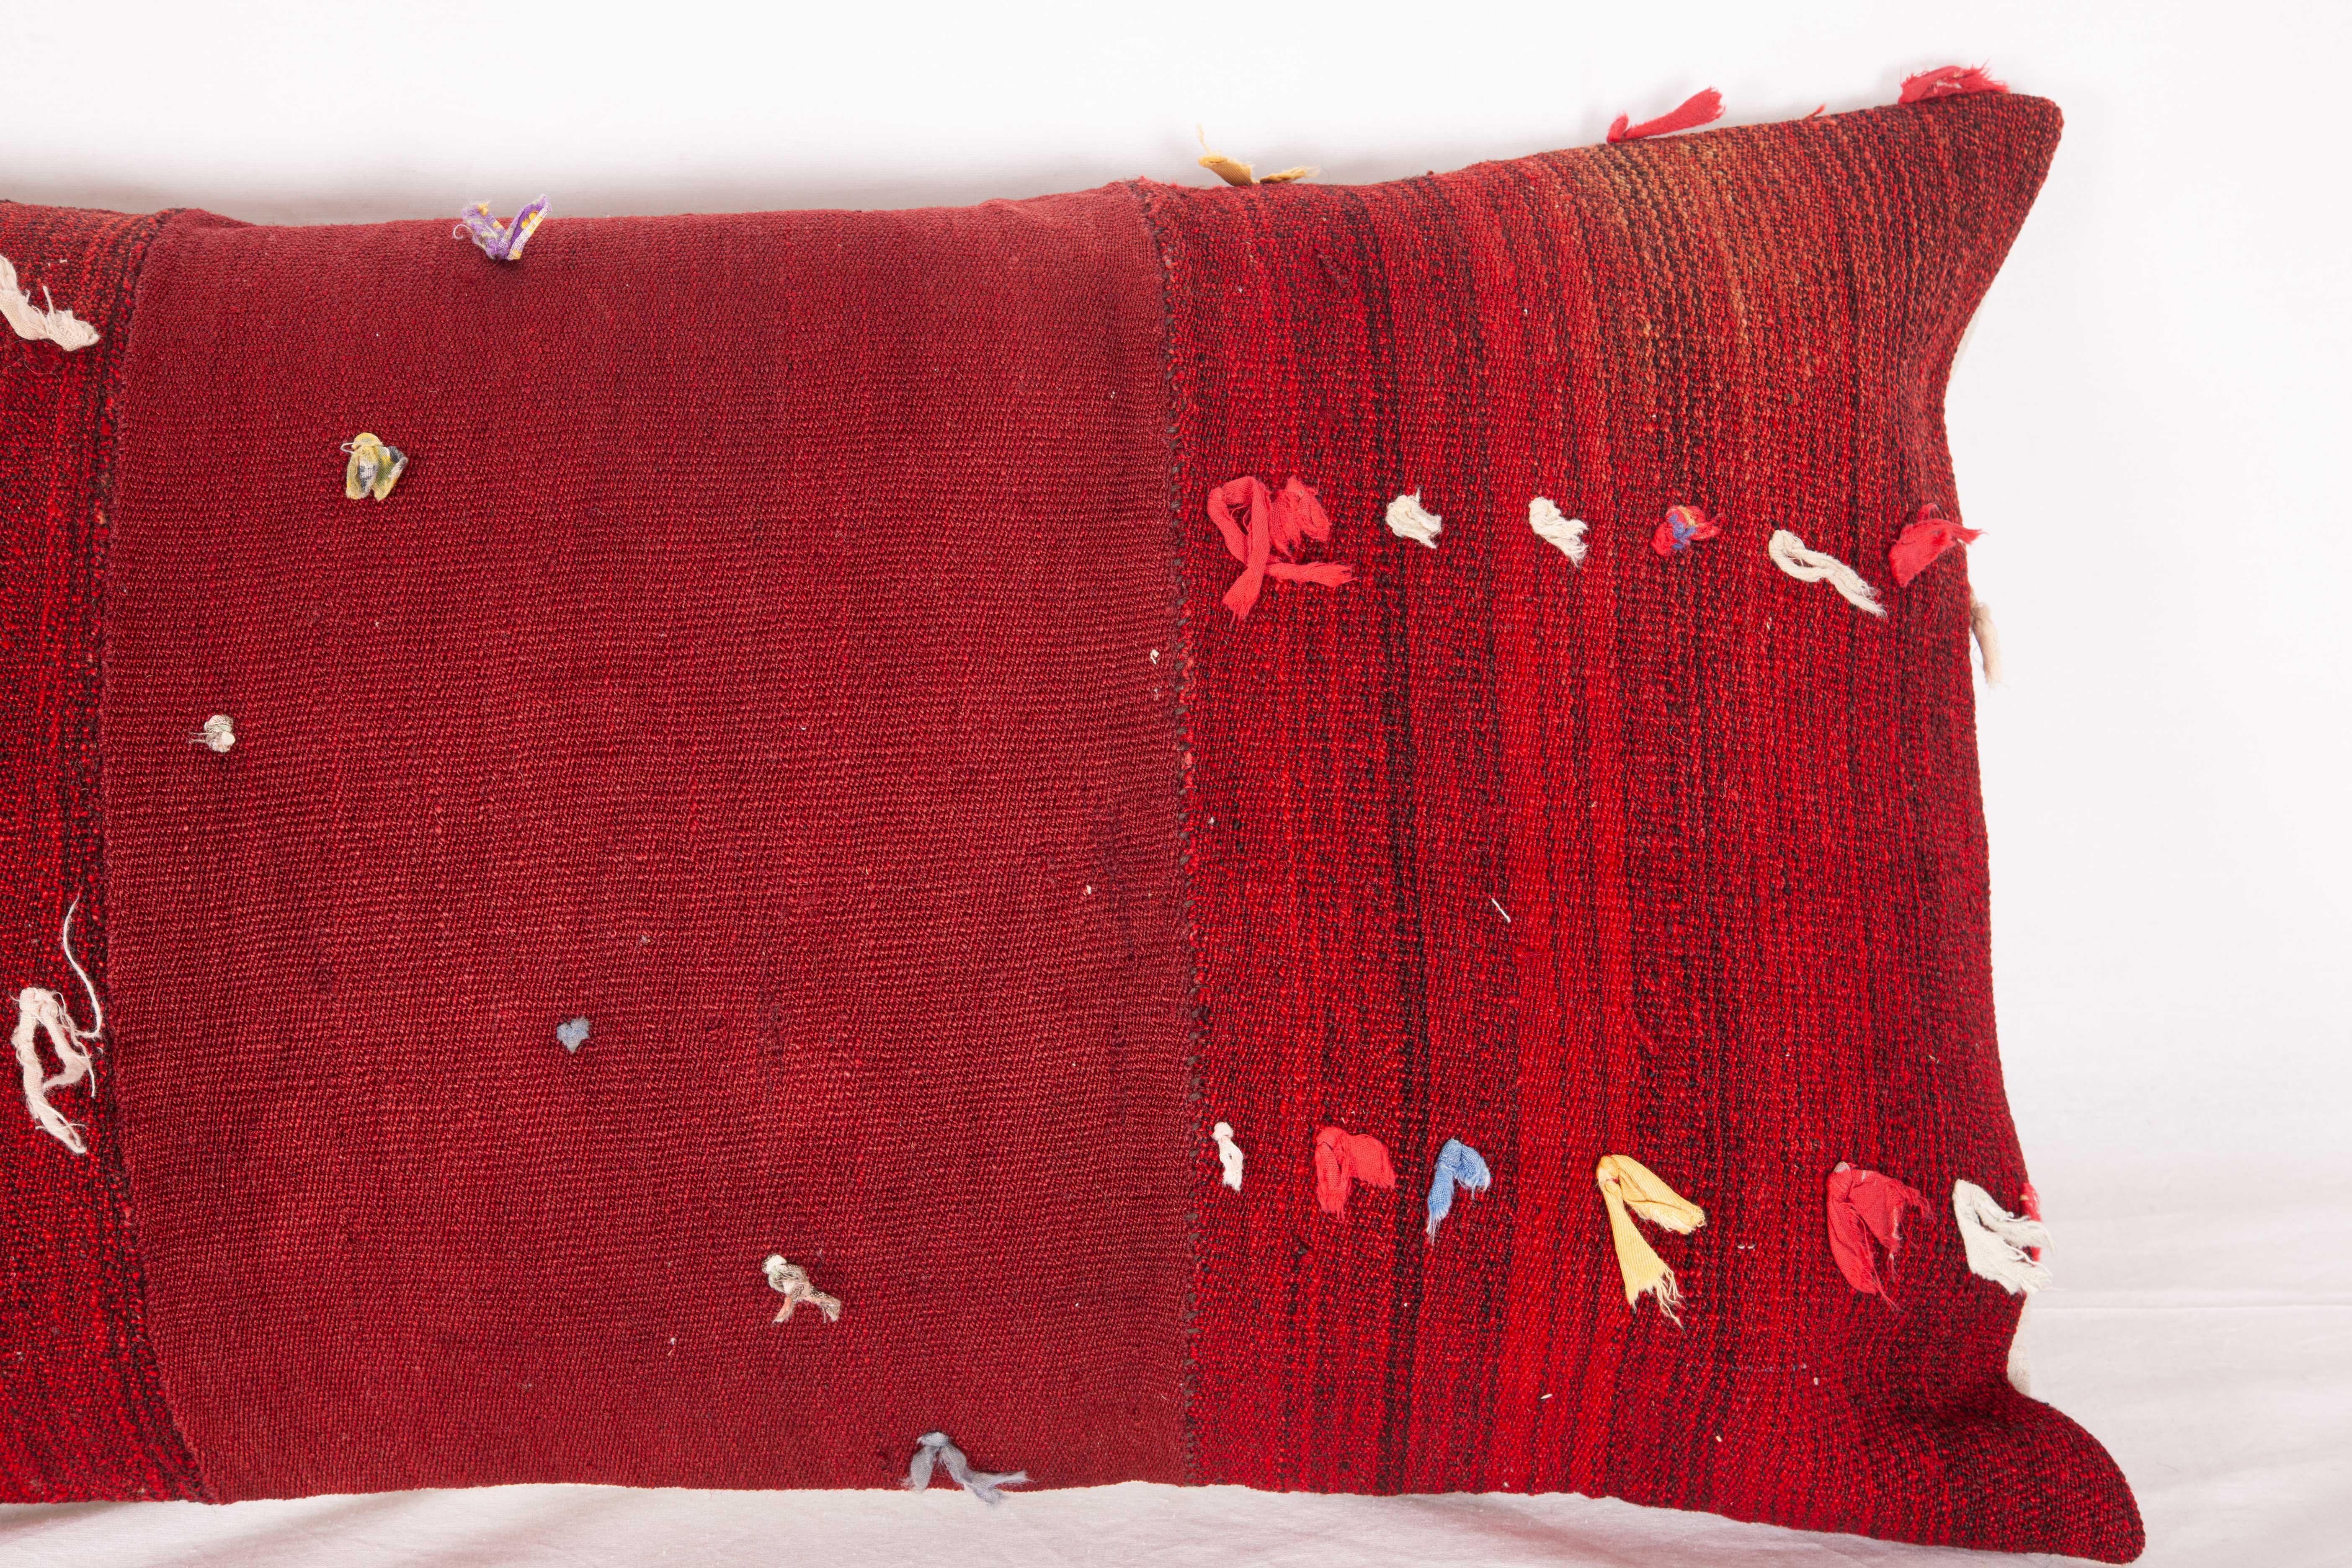 Turkish Lumbar Pillow Case Fashioned from a Mid-20th Century Anatolian Cover